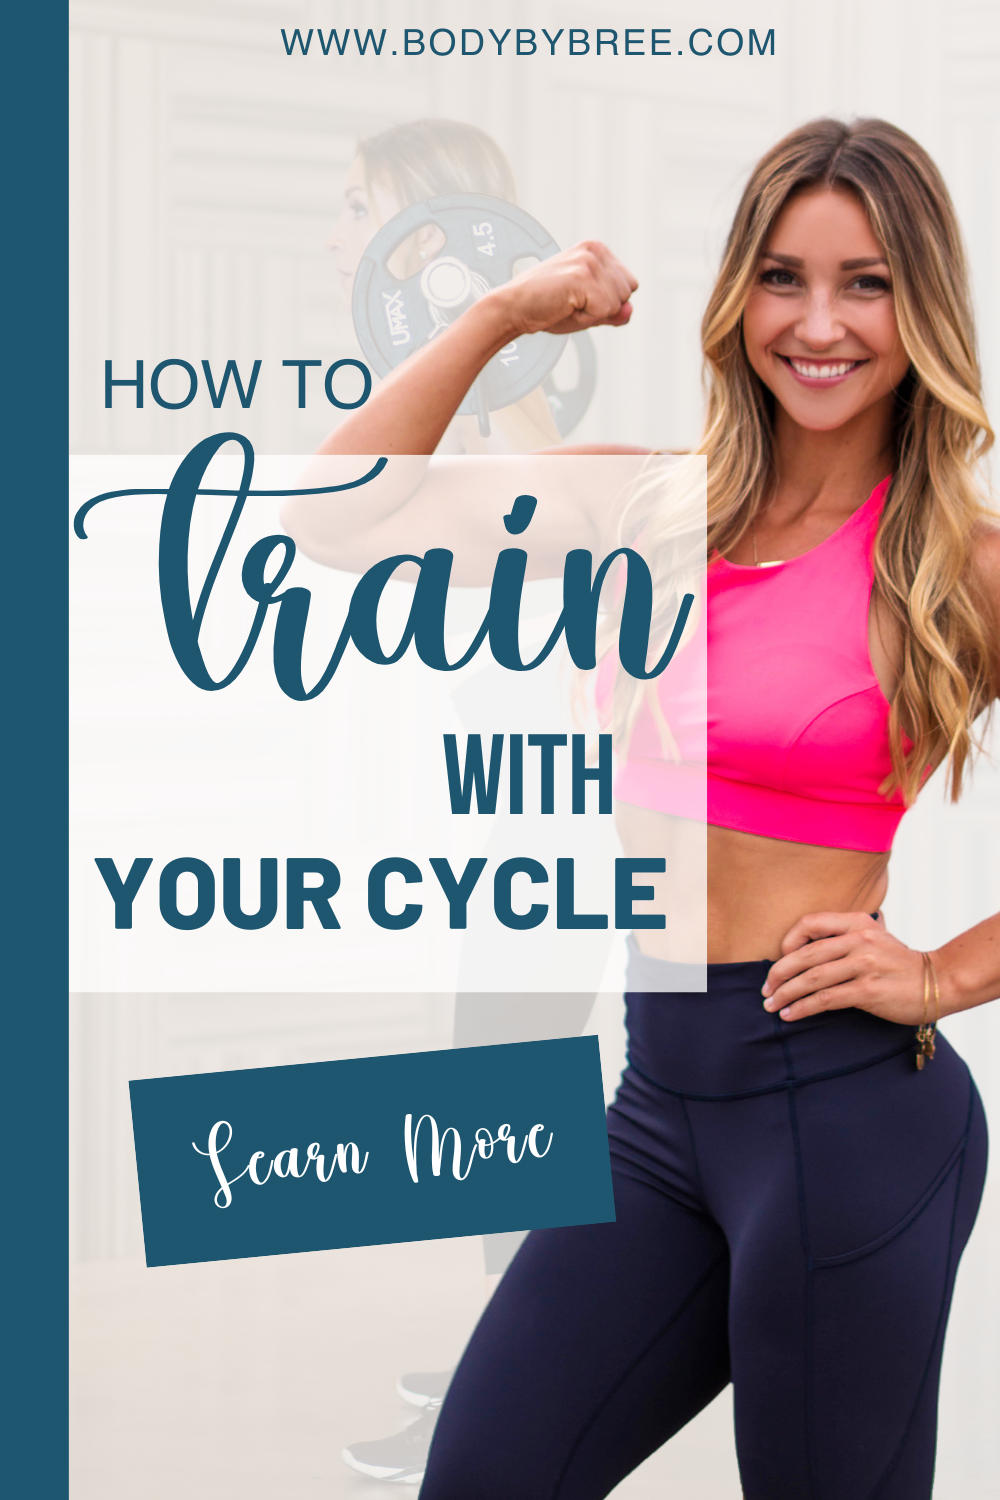 HOW TO TRAIN ACCORDING TO YOUR CYCLE